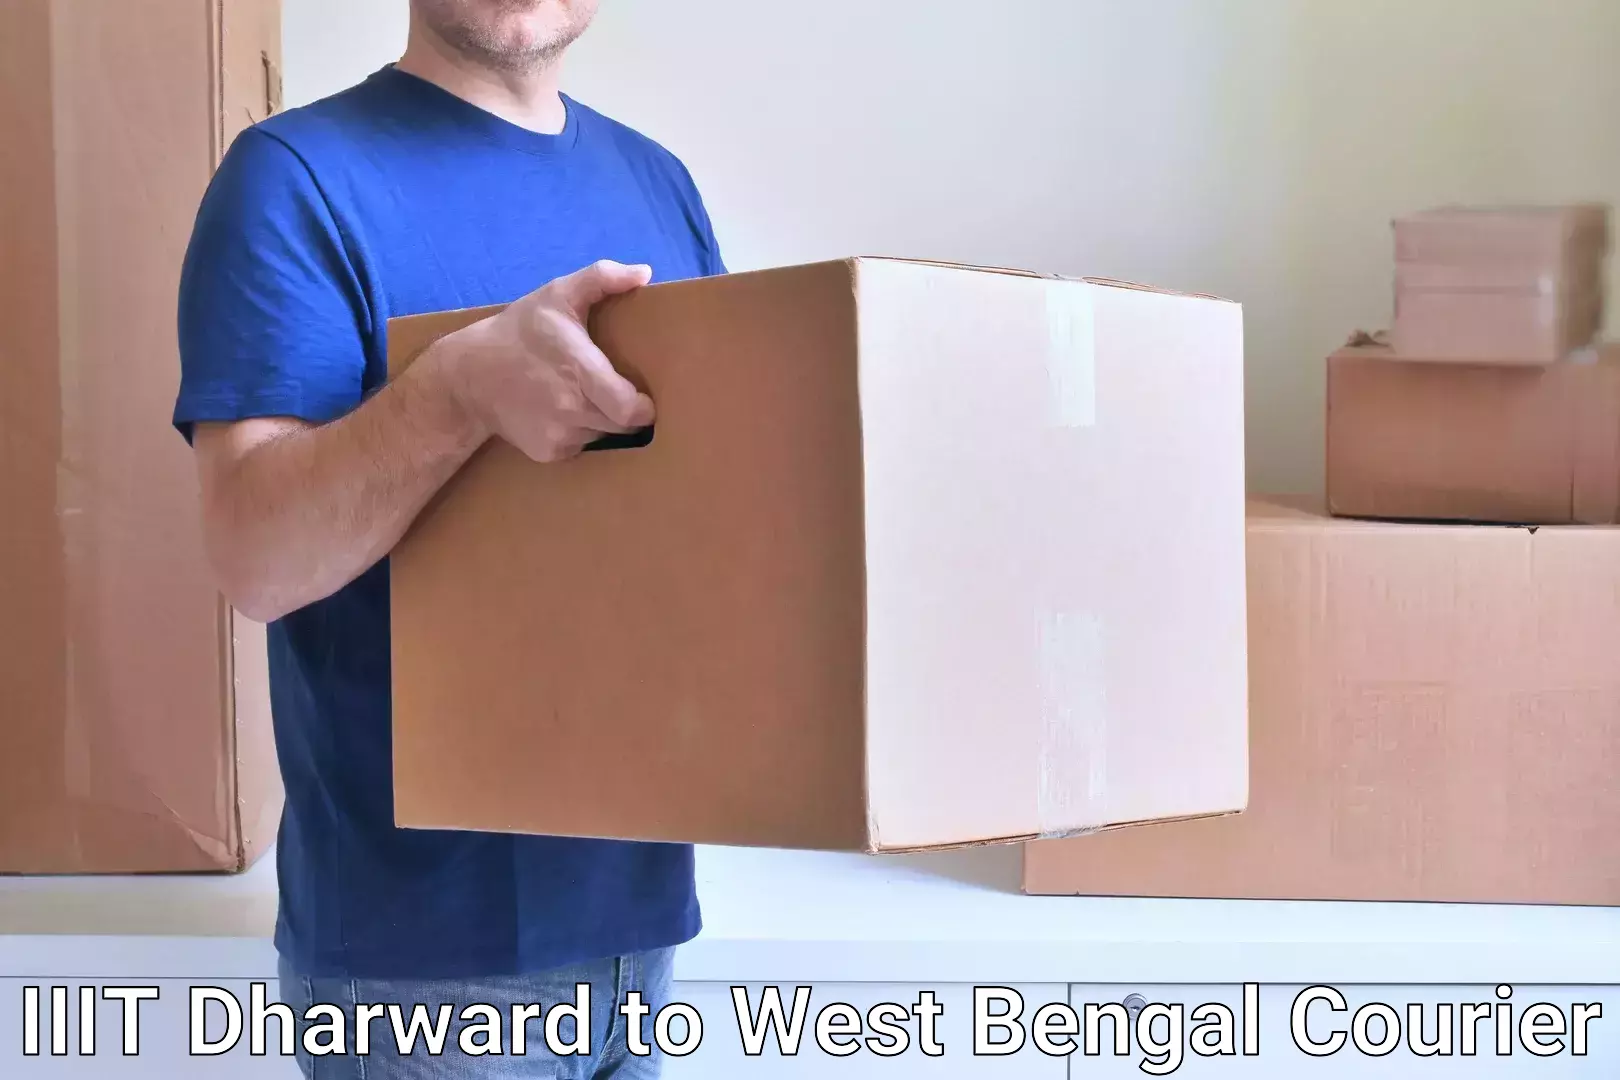 Affordable parcel service IIIT Dharward to West Bengal